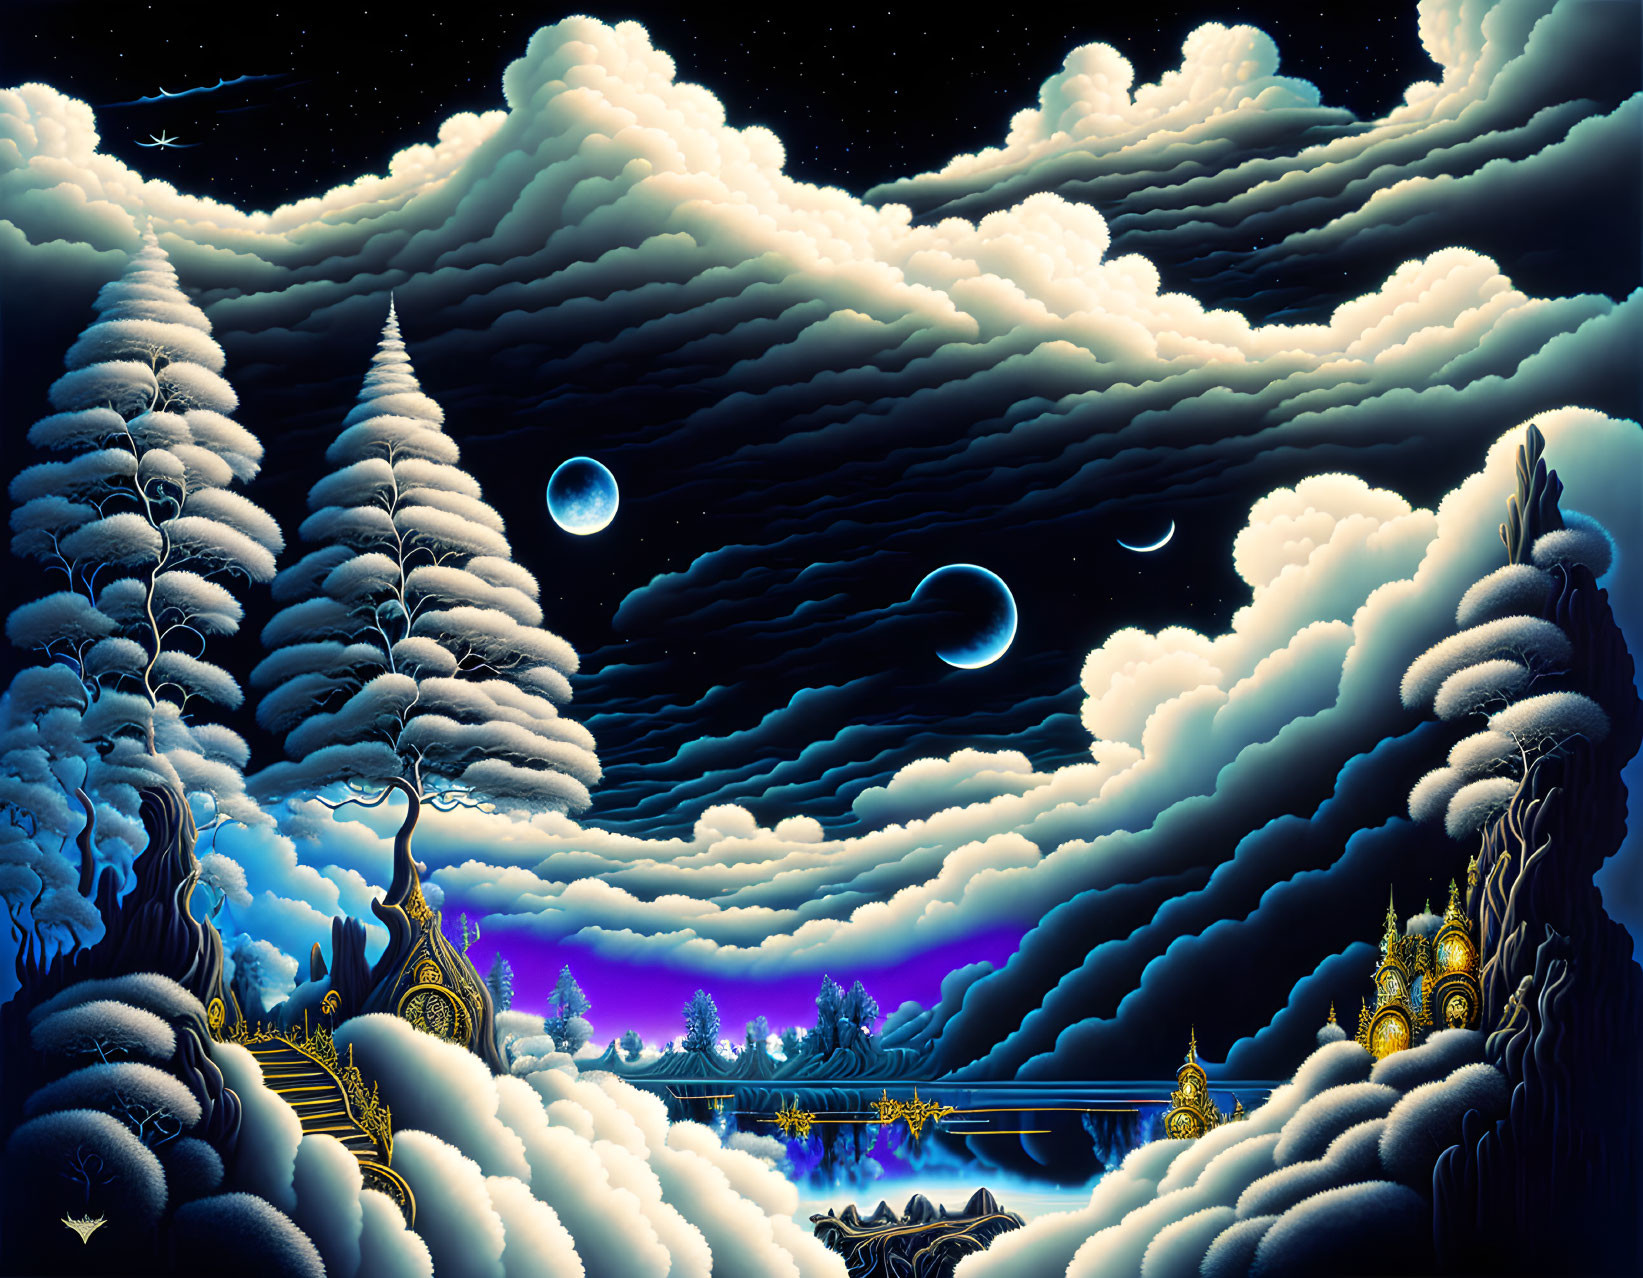 Fantastical night scene with glowing moons, stars, snowy trees, rivers, and Asian-style architecture